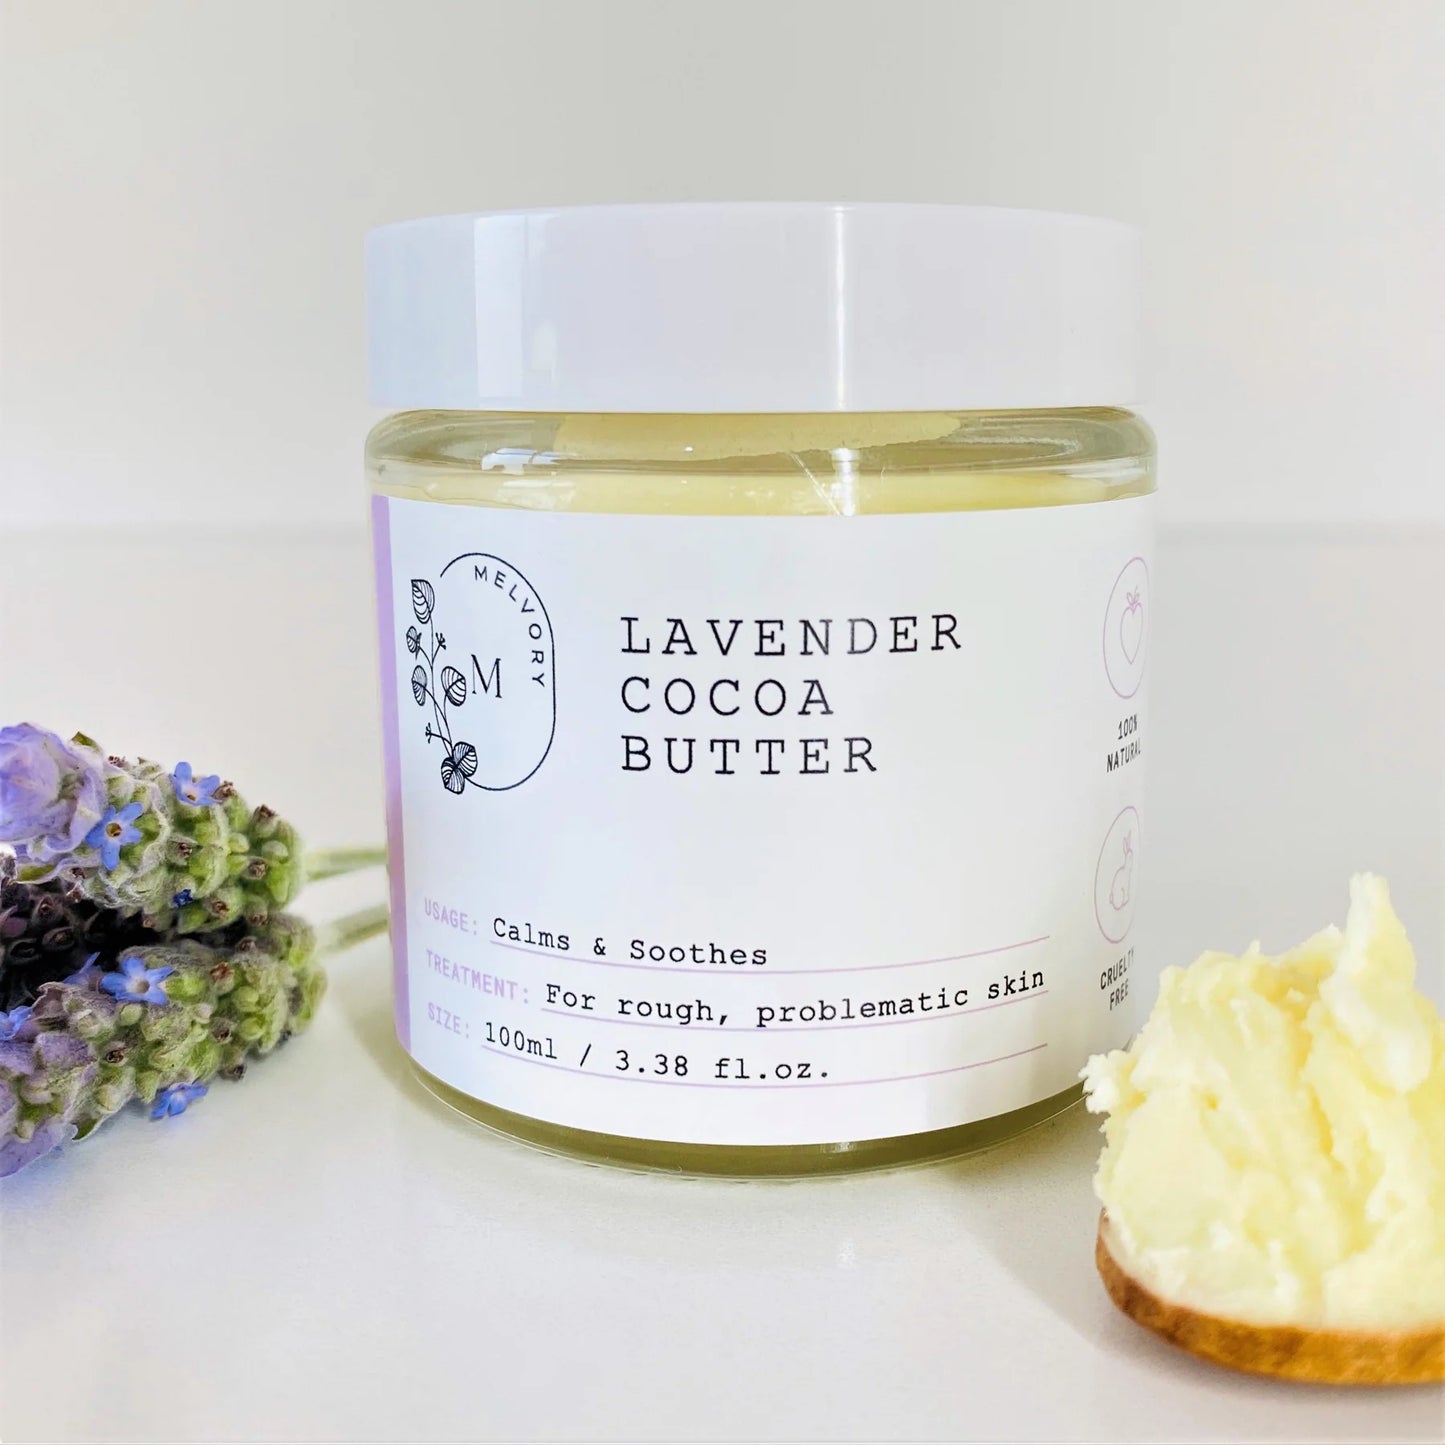 Melvory - Lavender Cocoa Butter